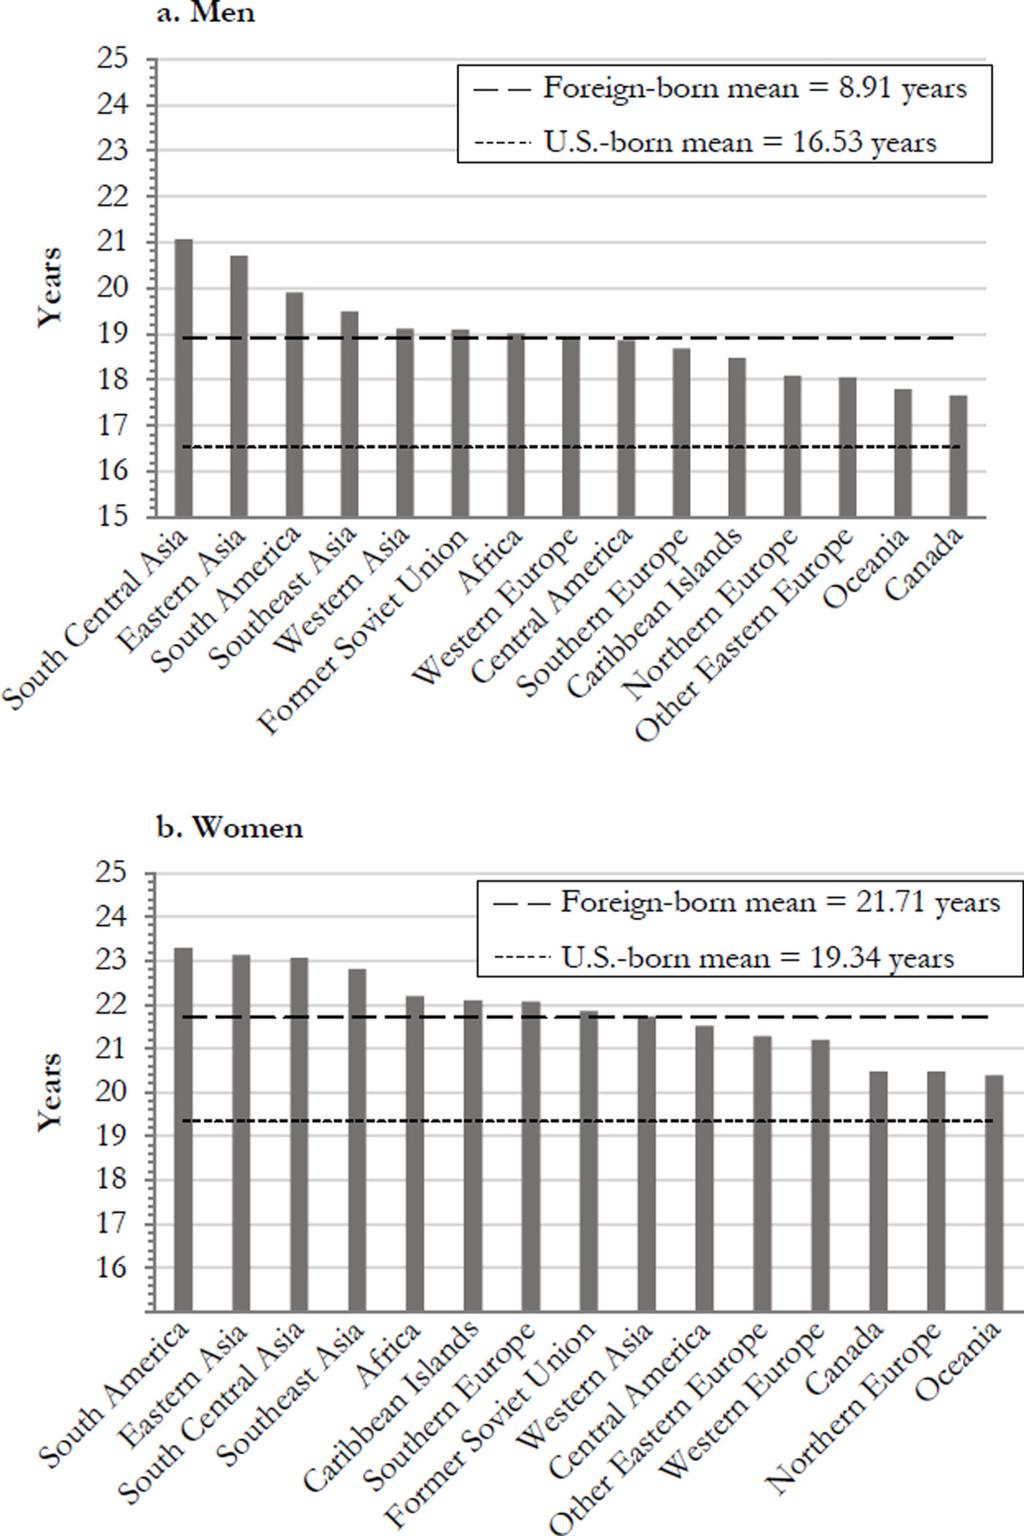 Mehta et al. Page 22 Fig. 1. Life expectancy in years at age 65 by place of birth and sex among the U.S. foreign-born: 2000 2009 Social Security Administration administrative files.